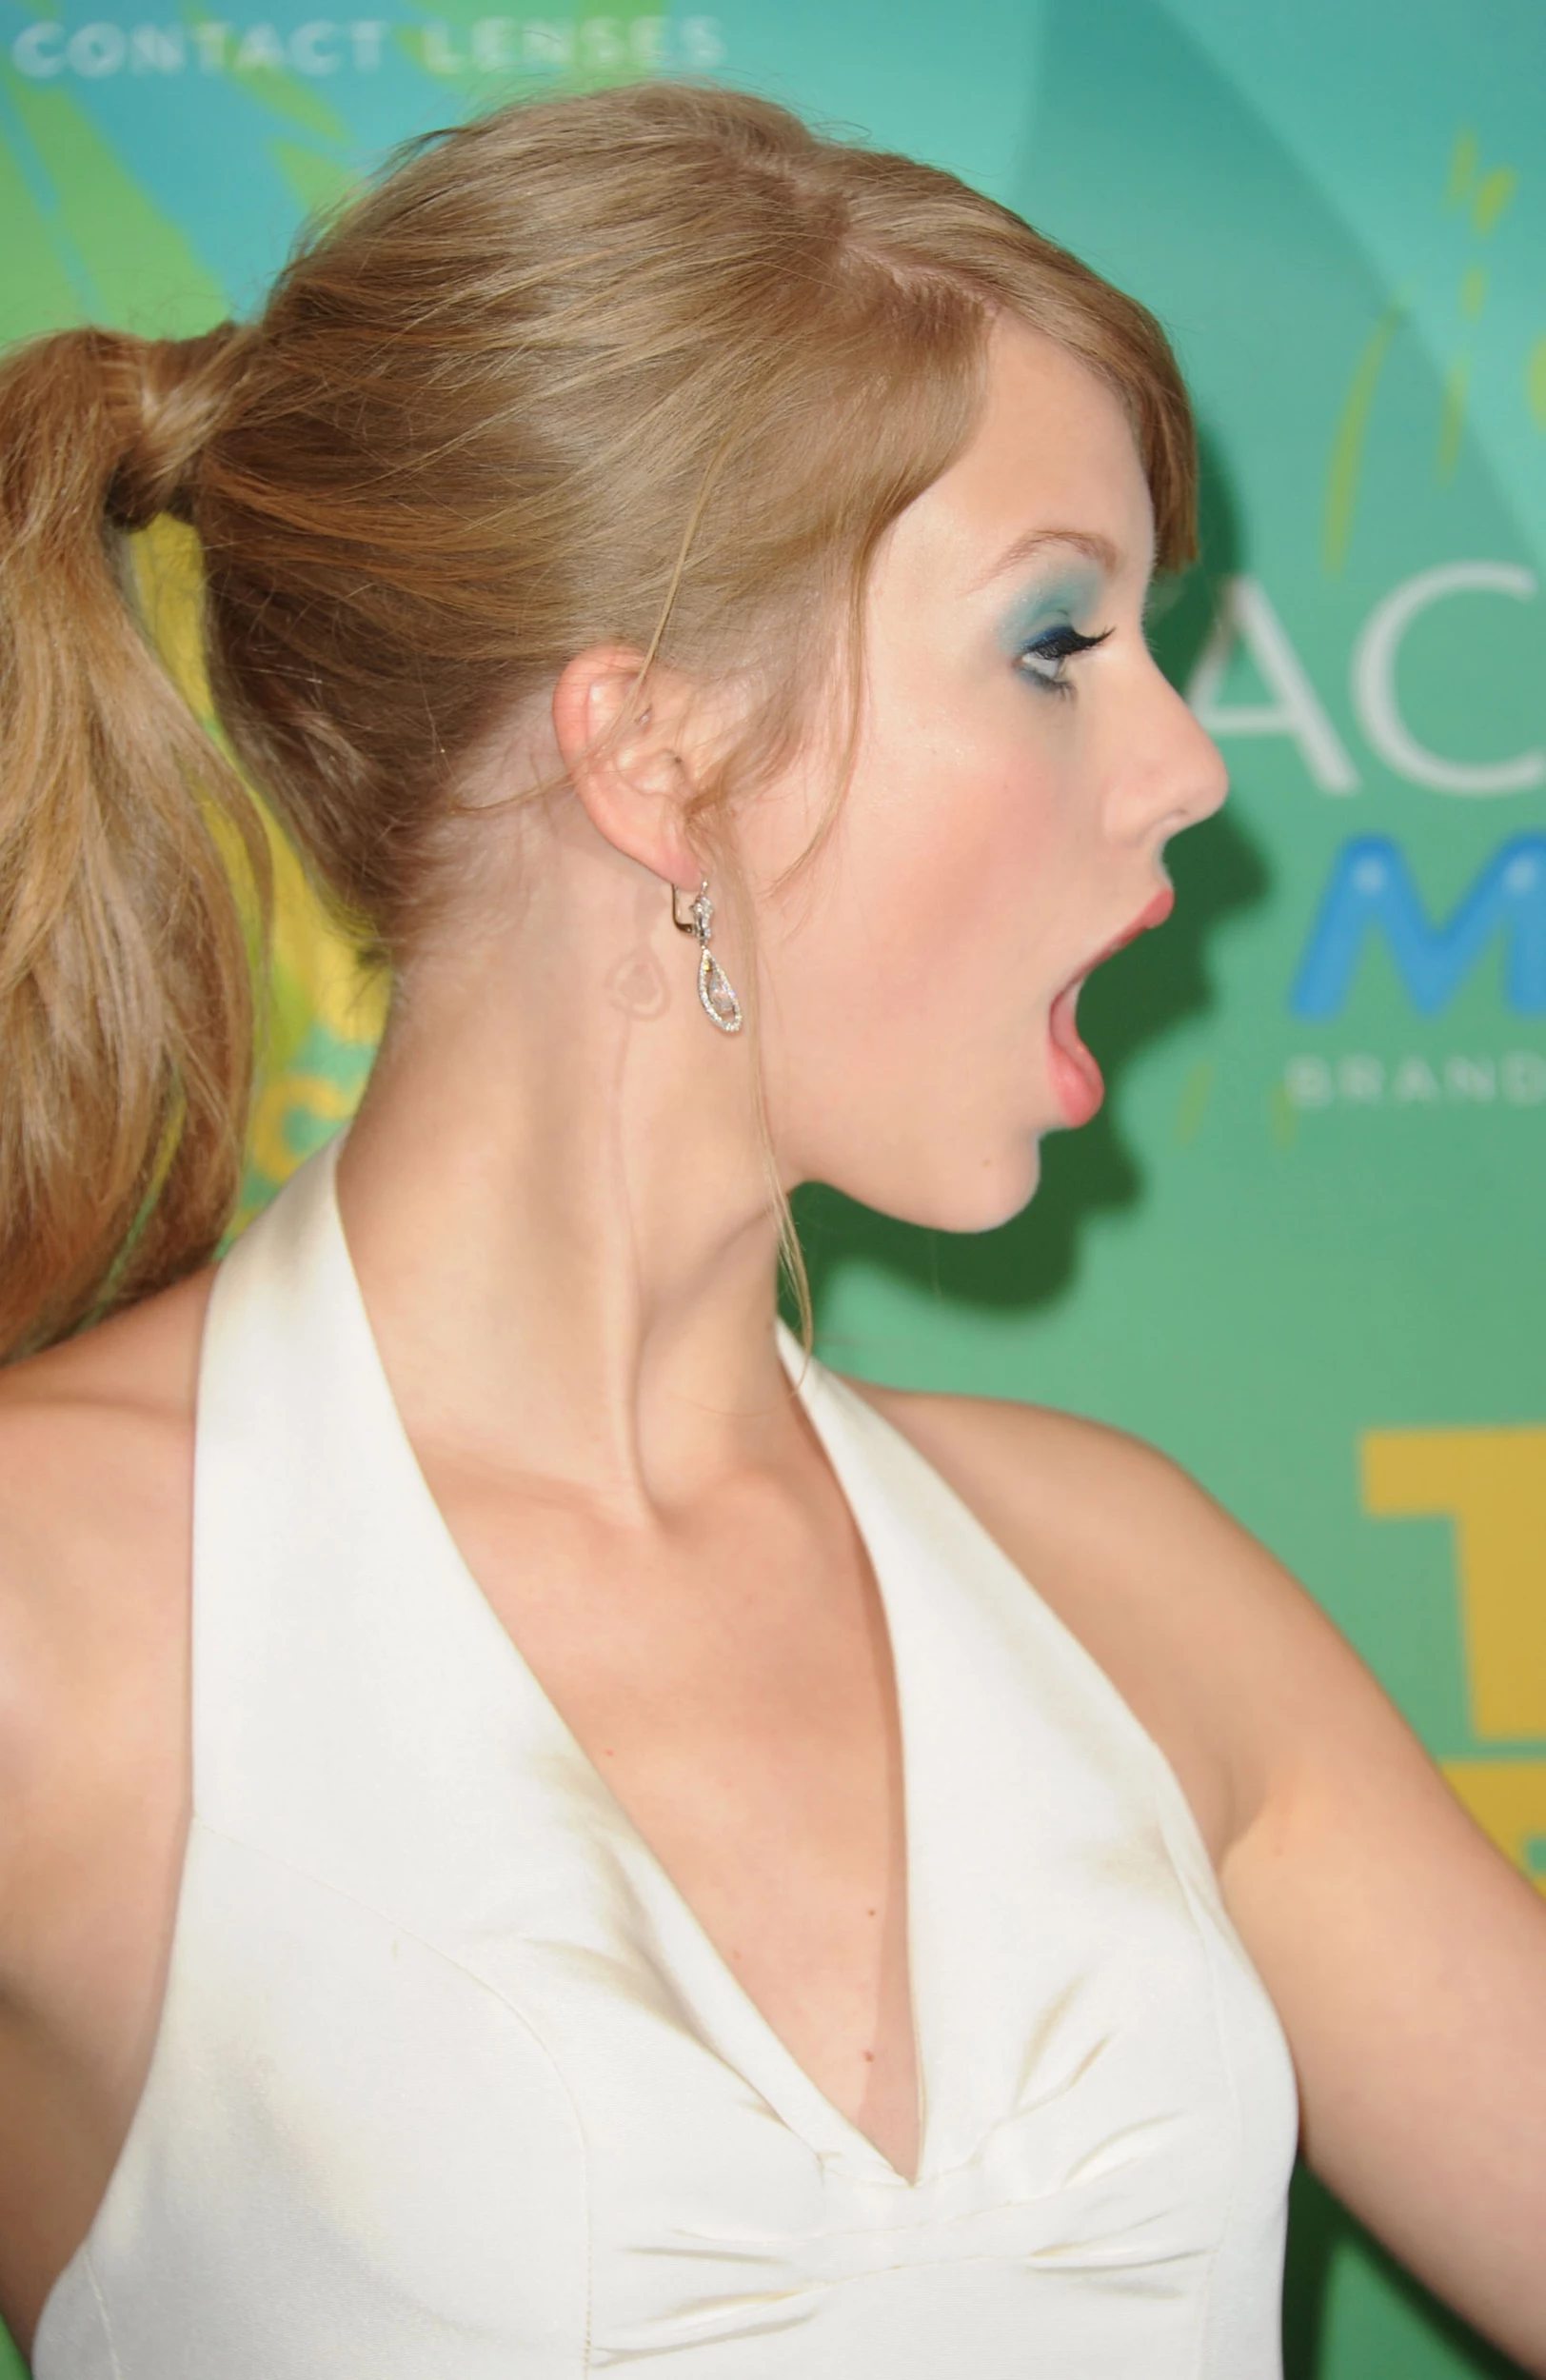 taylor swift oops face